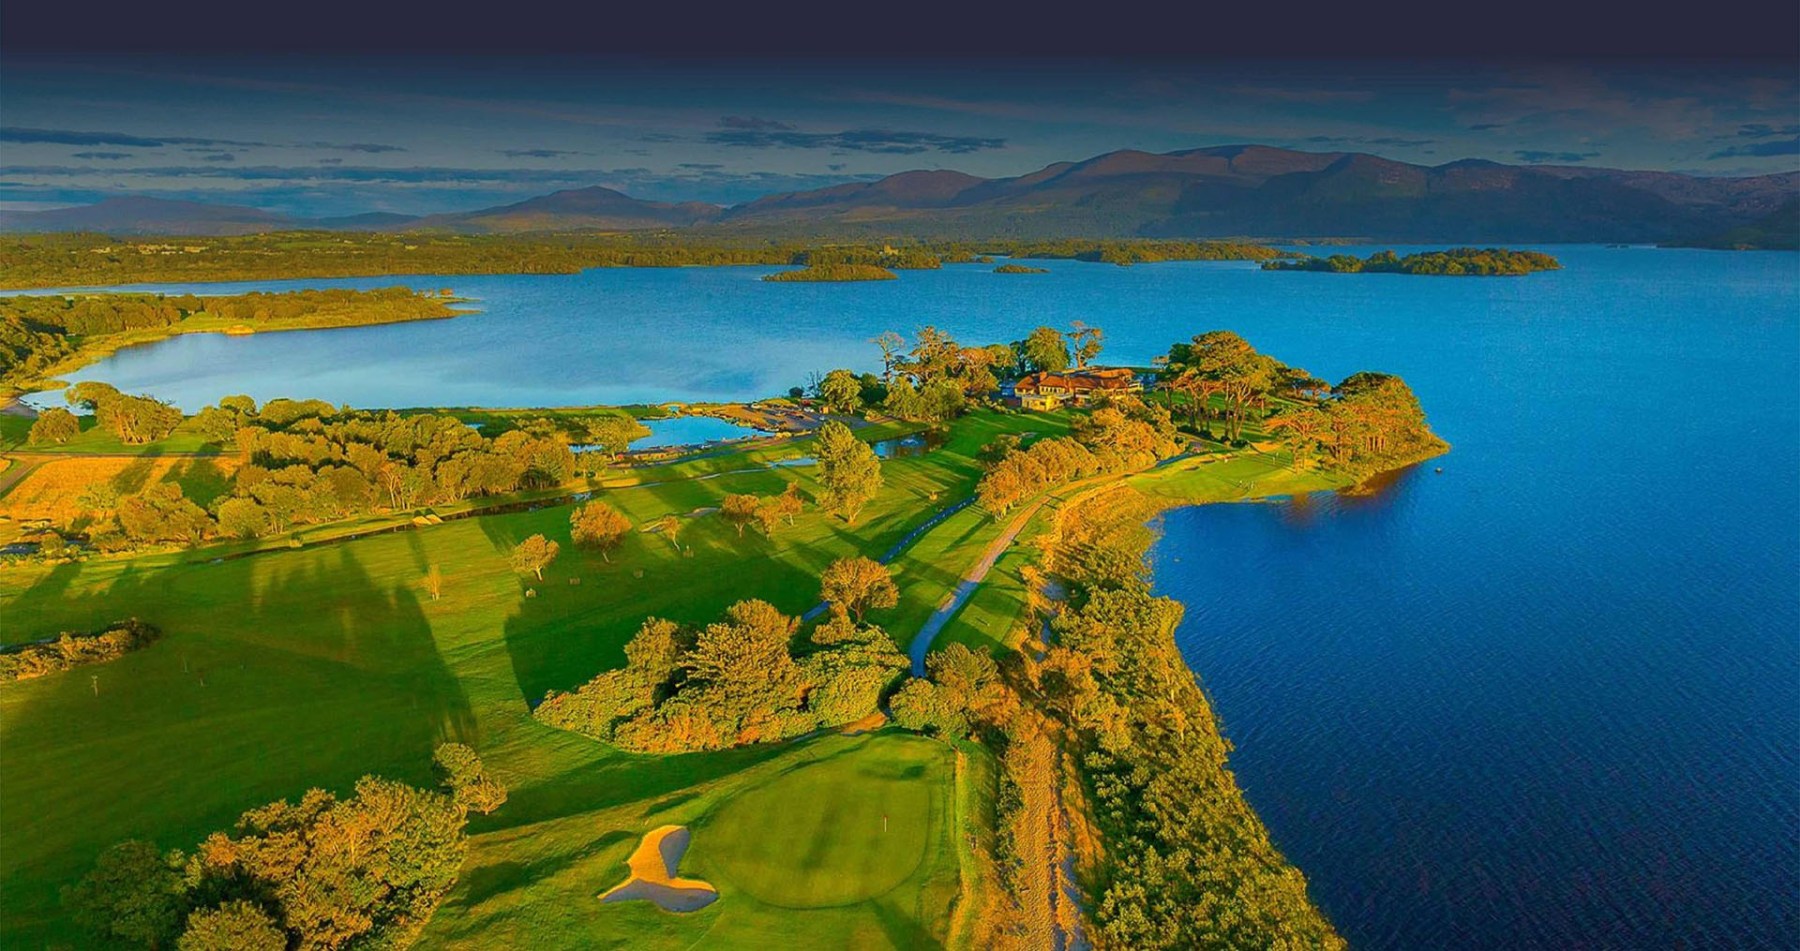 Golf course by a lake in southwest Ireland